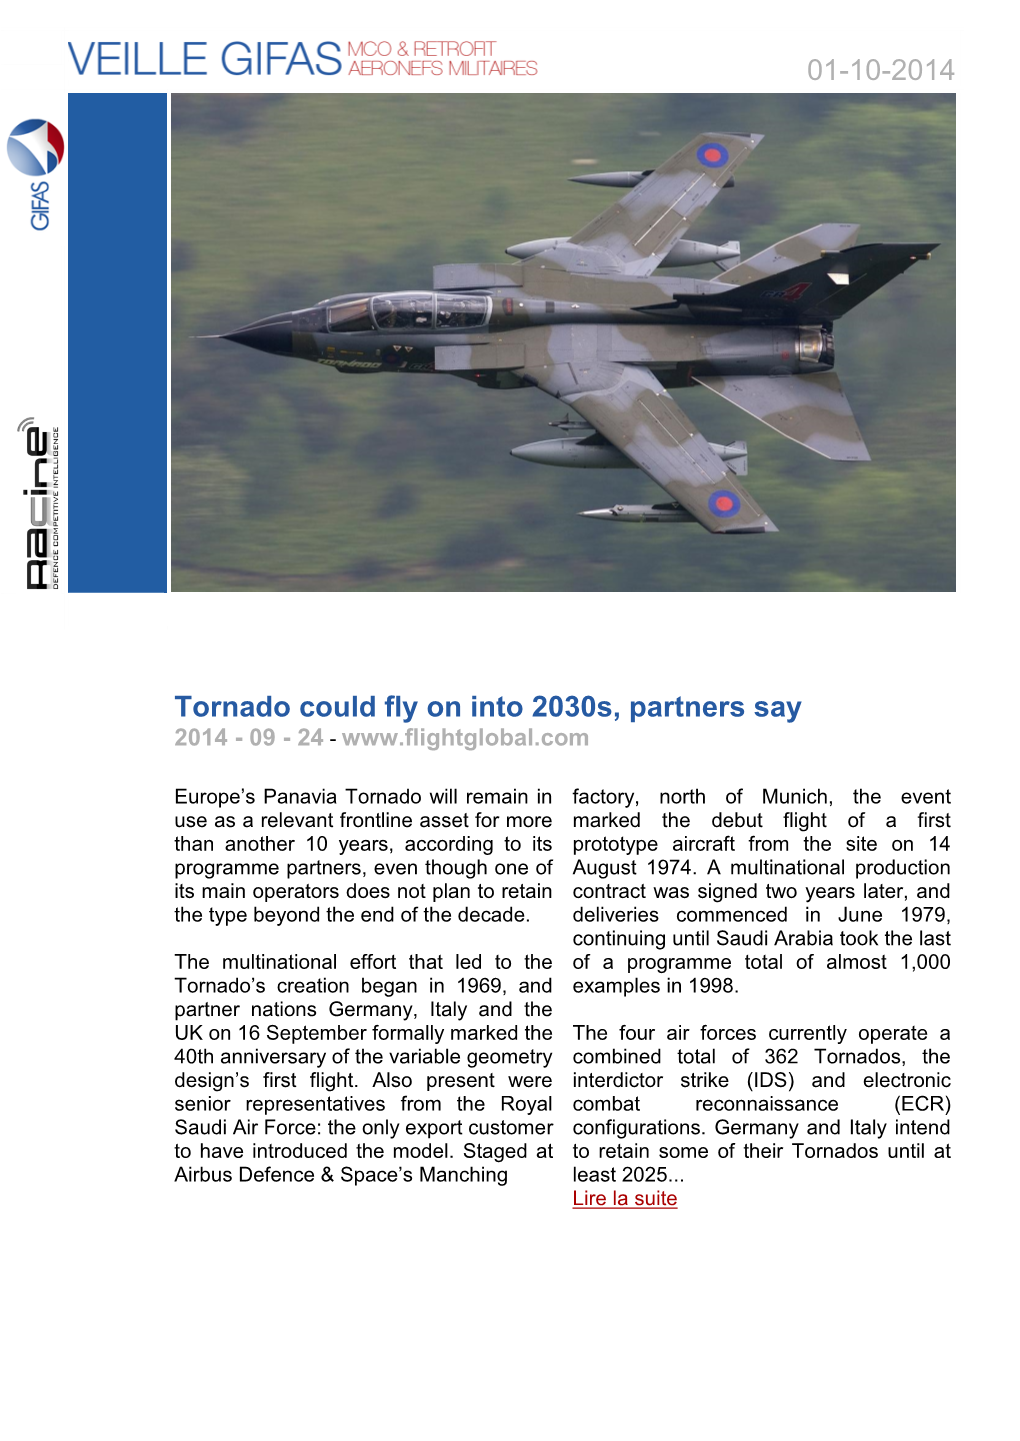 01-10-2014 Tornado Could Fly on Into 2030S, Partners